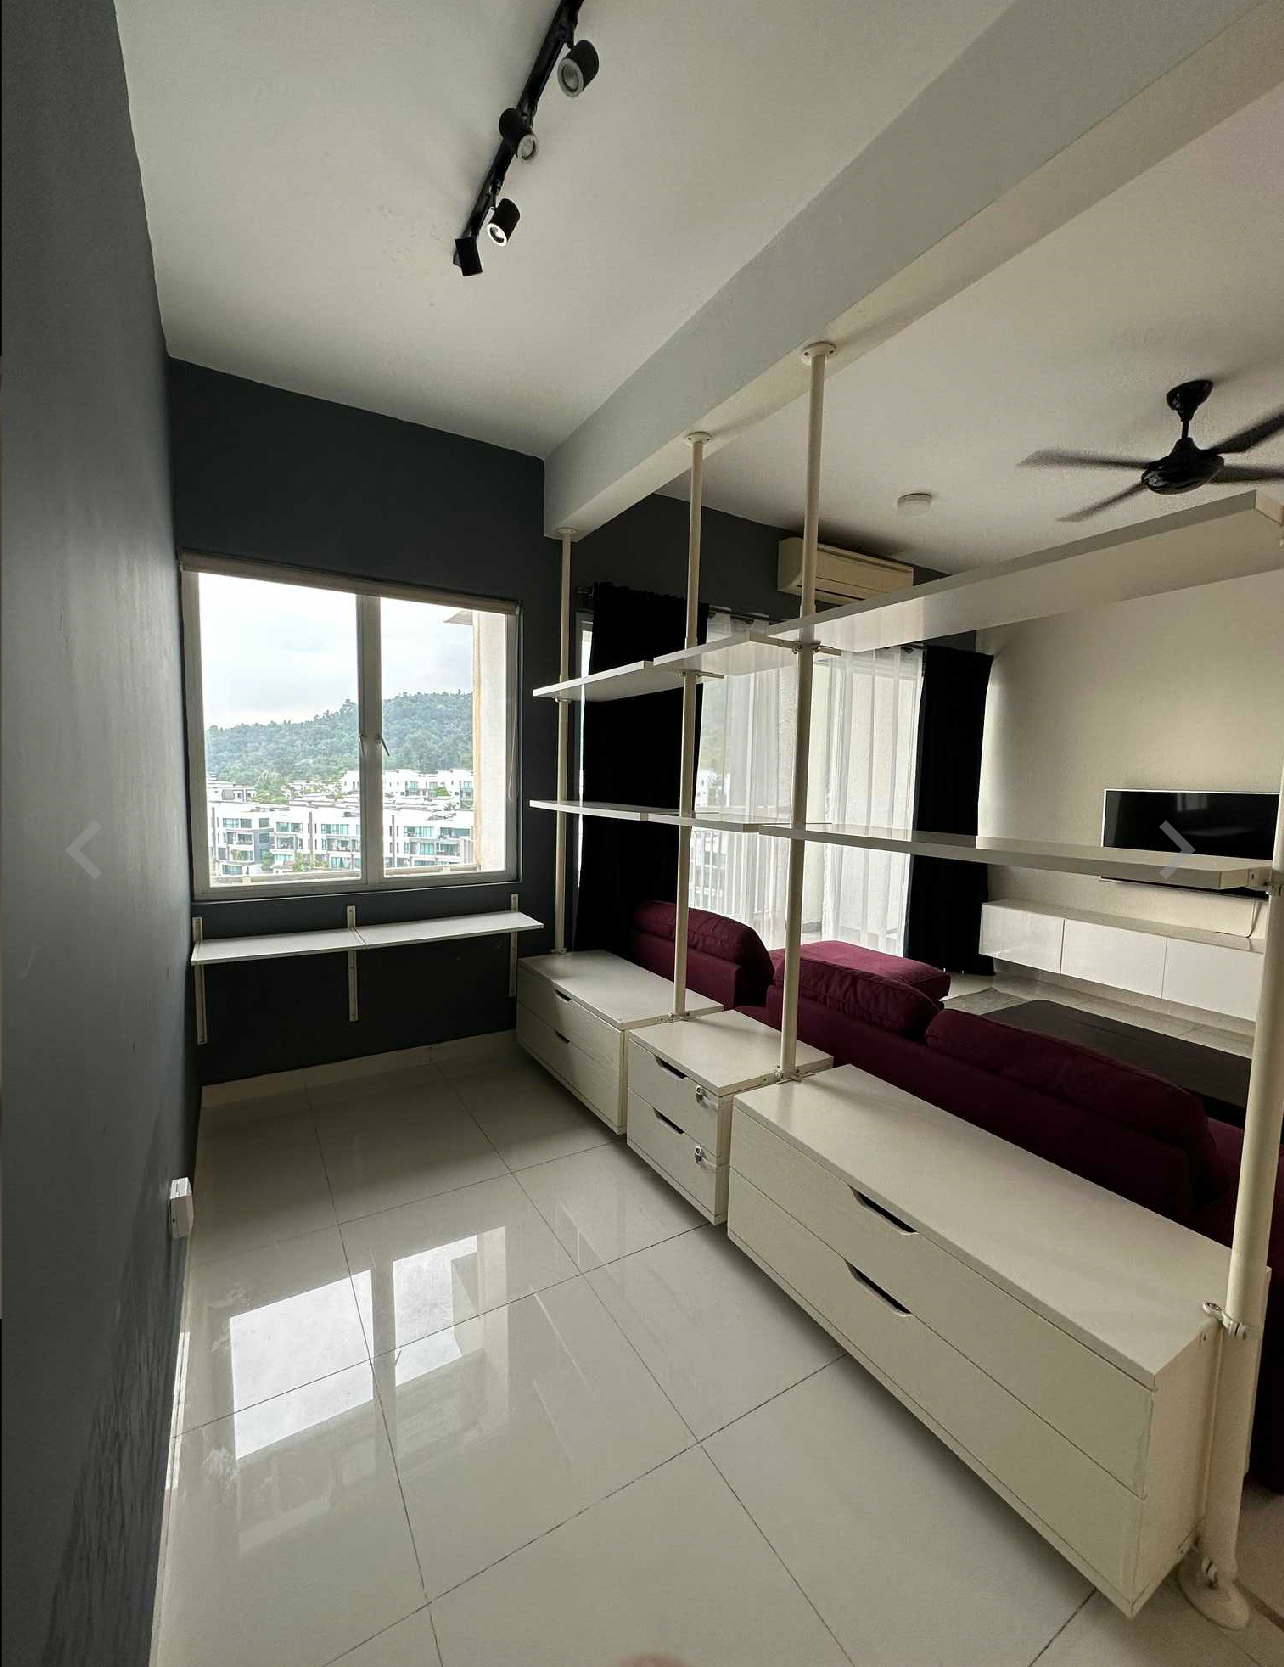 room for rent, studio, telok panglima garang, Send the owner a message on WhatsApp/facebook if you want to RENT the unit facebook (Mohammed Nhat)&Telegram(@muhammednhat101) Fully furnished non sharing :(comfortable)